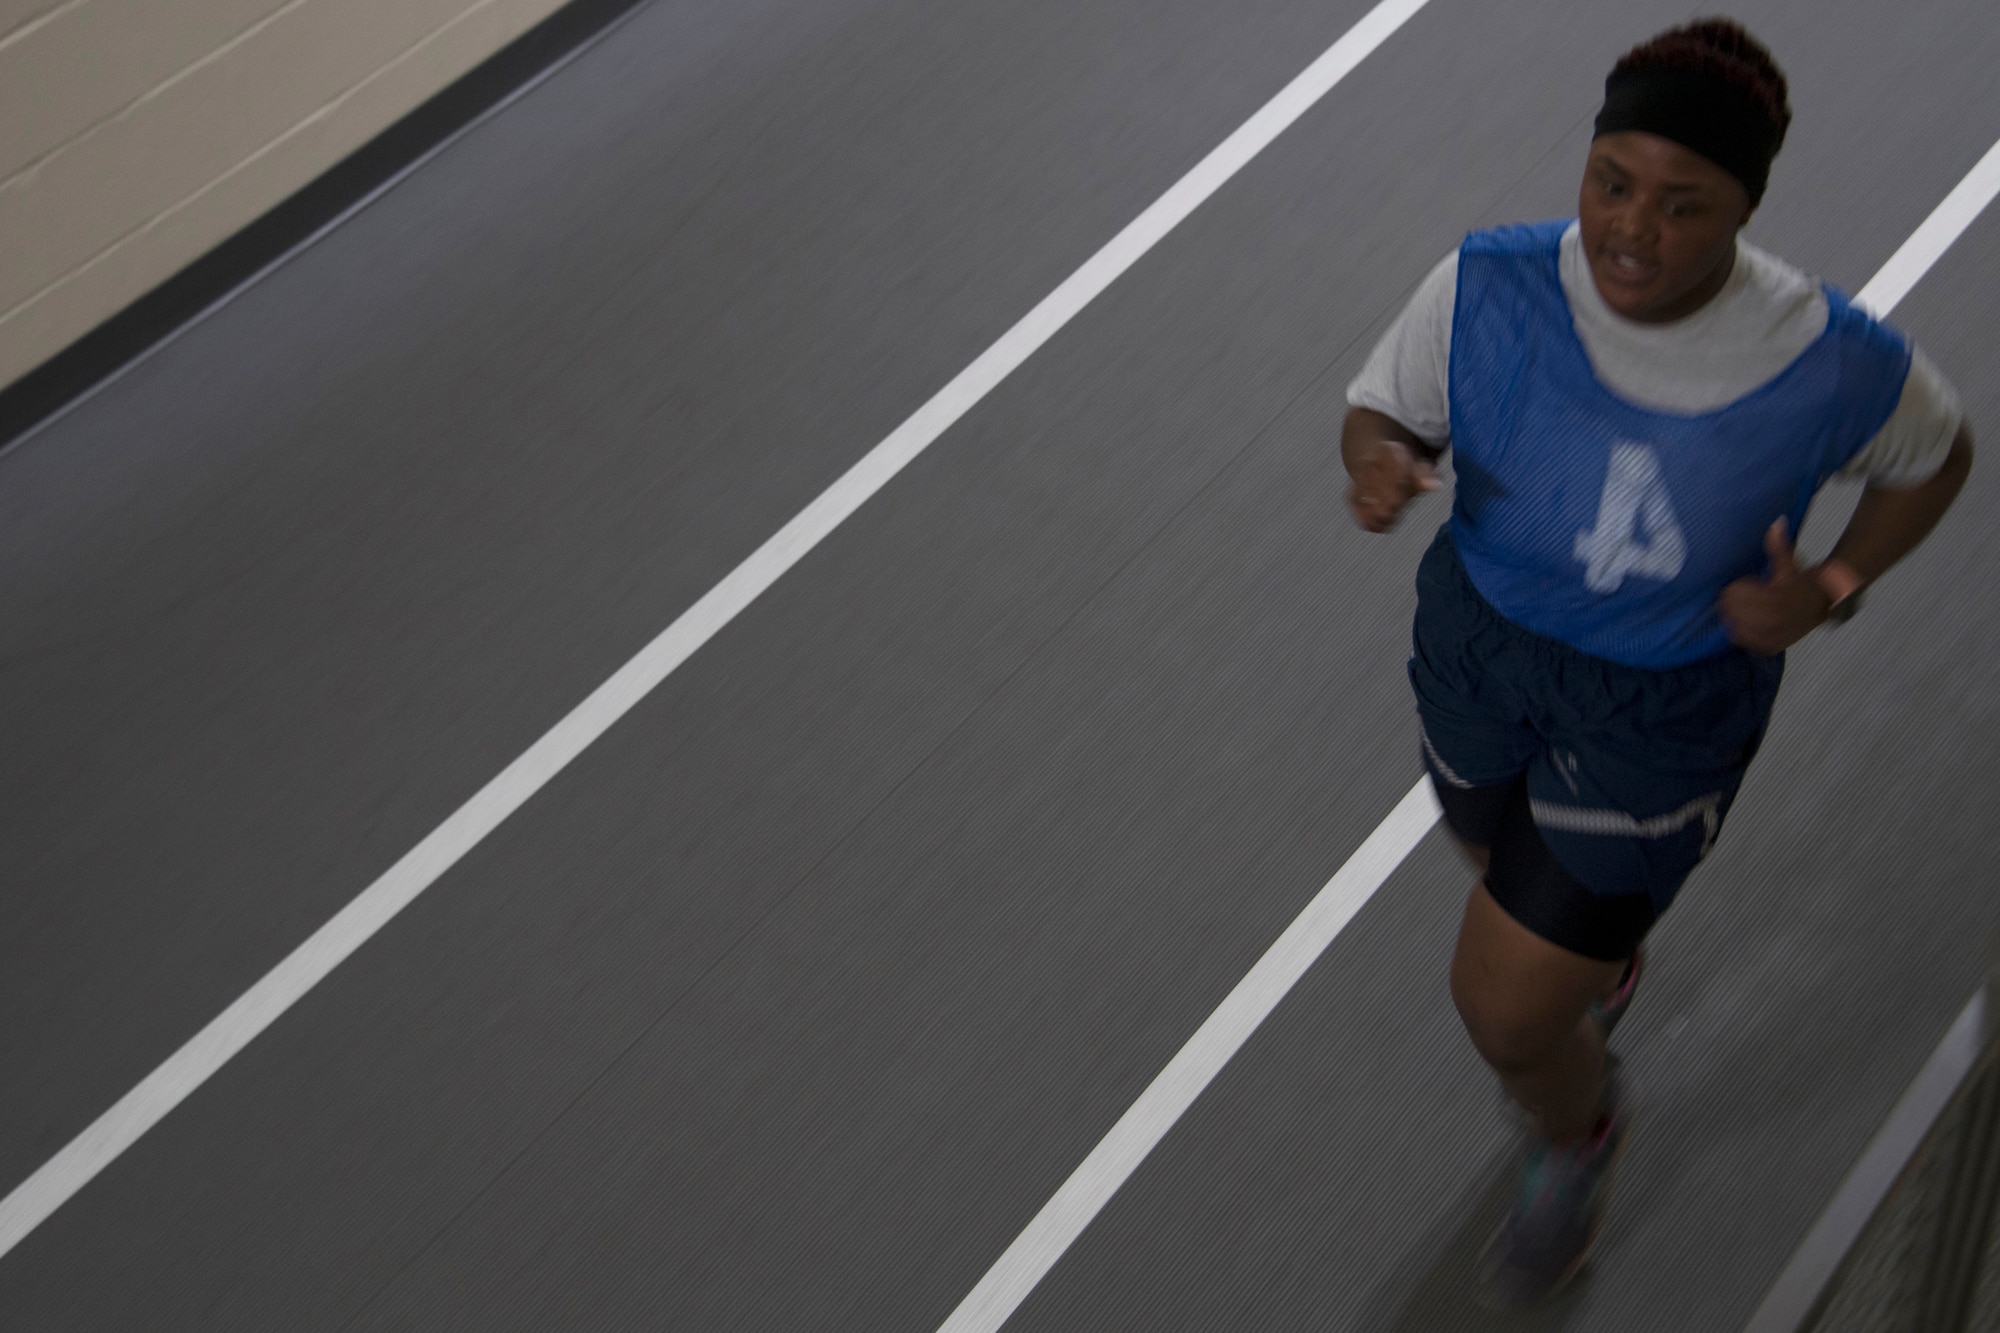 Senior Airman Decaqunita Forte, assigned to the 307th Medical Squadron, completes the run portion of the Air Force physical fitness assessment at Barksdale Air Force Base, Louisiana, February 10, 2019. Physical fitness assessments are one  tool used in measuring an Airman’s overall resiliency. (U.S. Air Force photo by Airman 1st Class Maxwell Daigle)